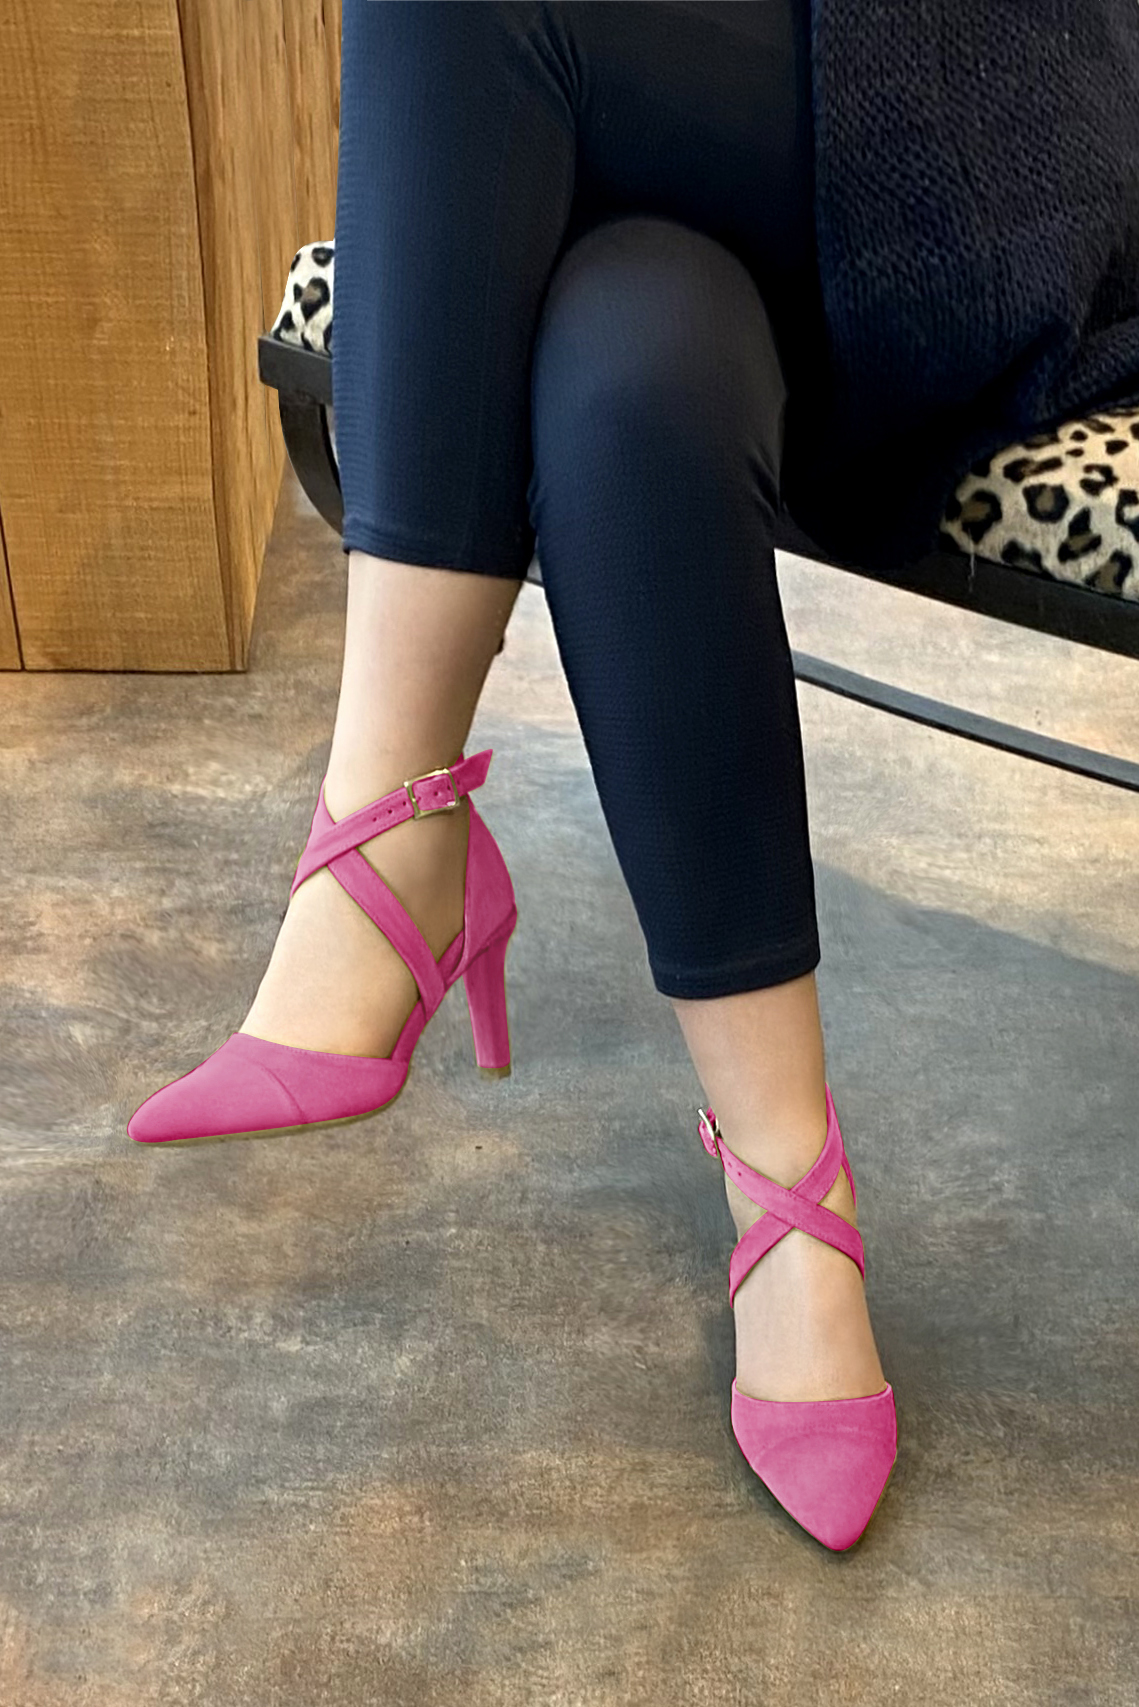 Shocking pink women's open side shoes, with crossed straps. Tapered toe. High slim heel. Worn view - Florence KOOIJMAN